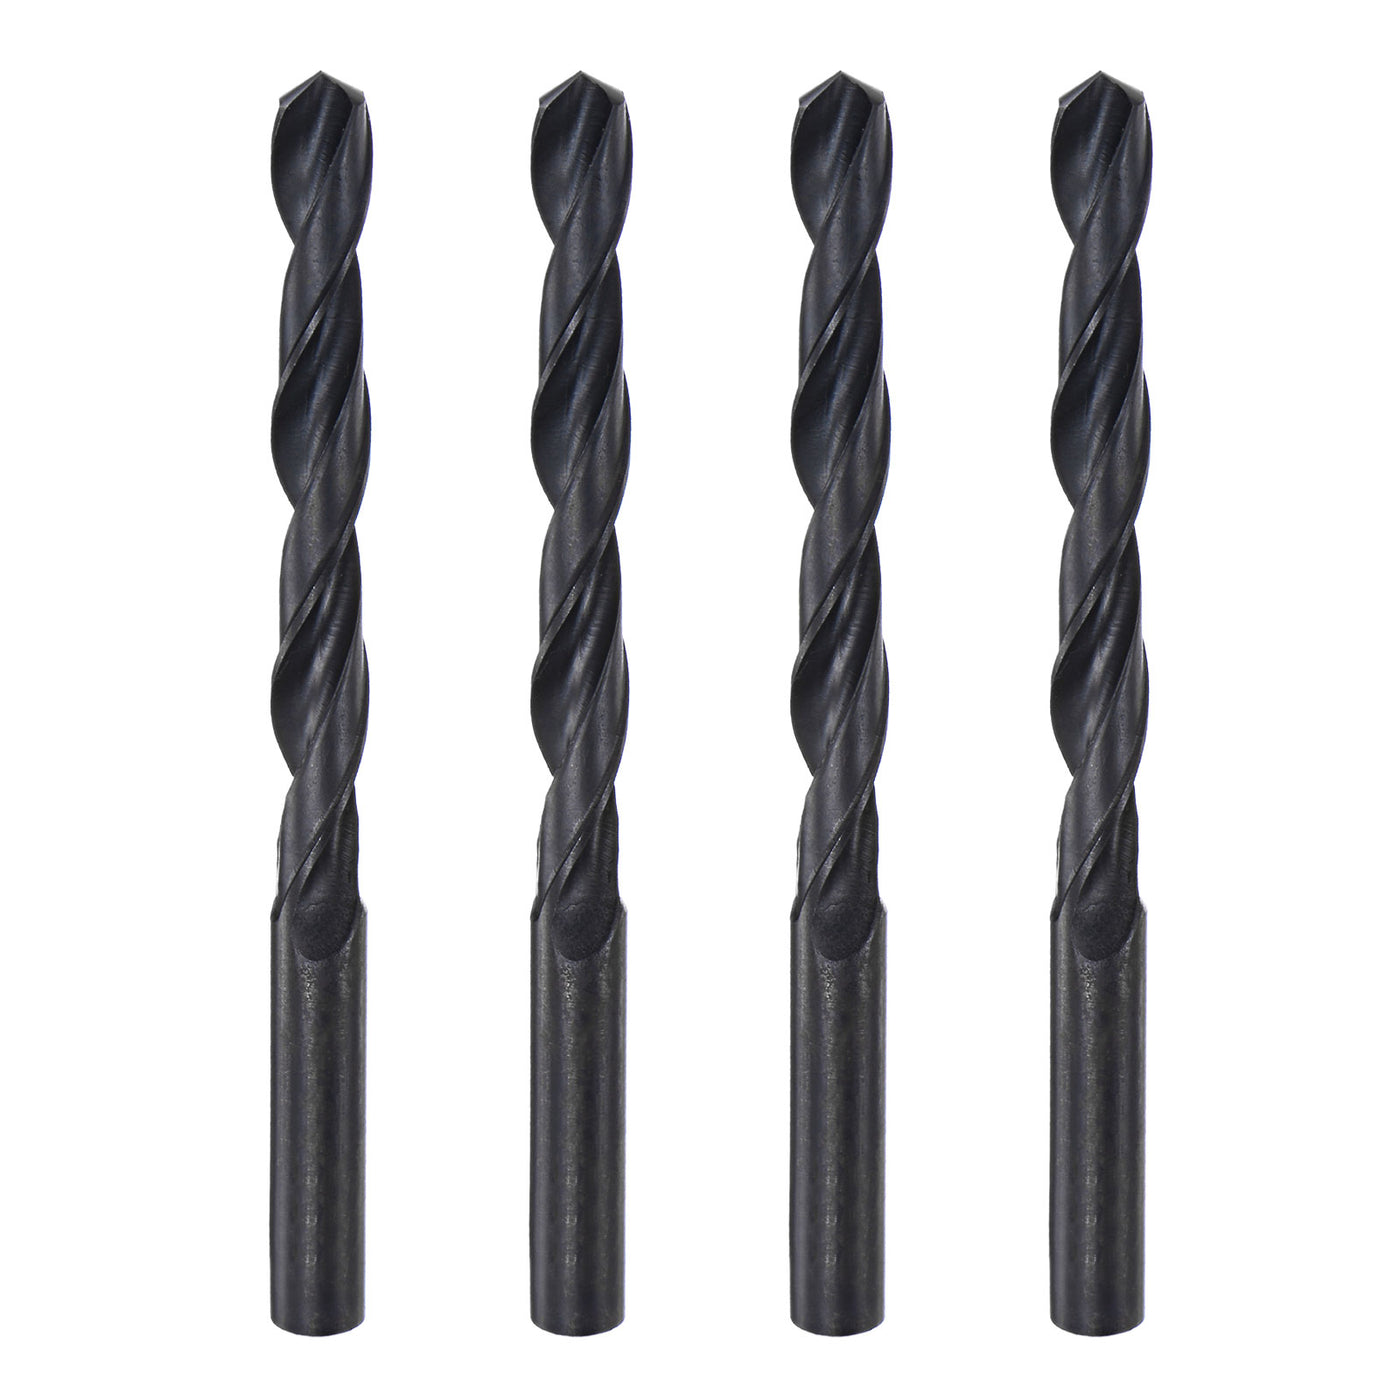 uxcell Uxcell High Speed Steel Twist Drill Bit, 10mm Fully Ground Black Oxide 132mm Long 4Pcs